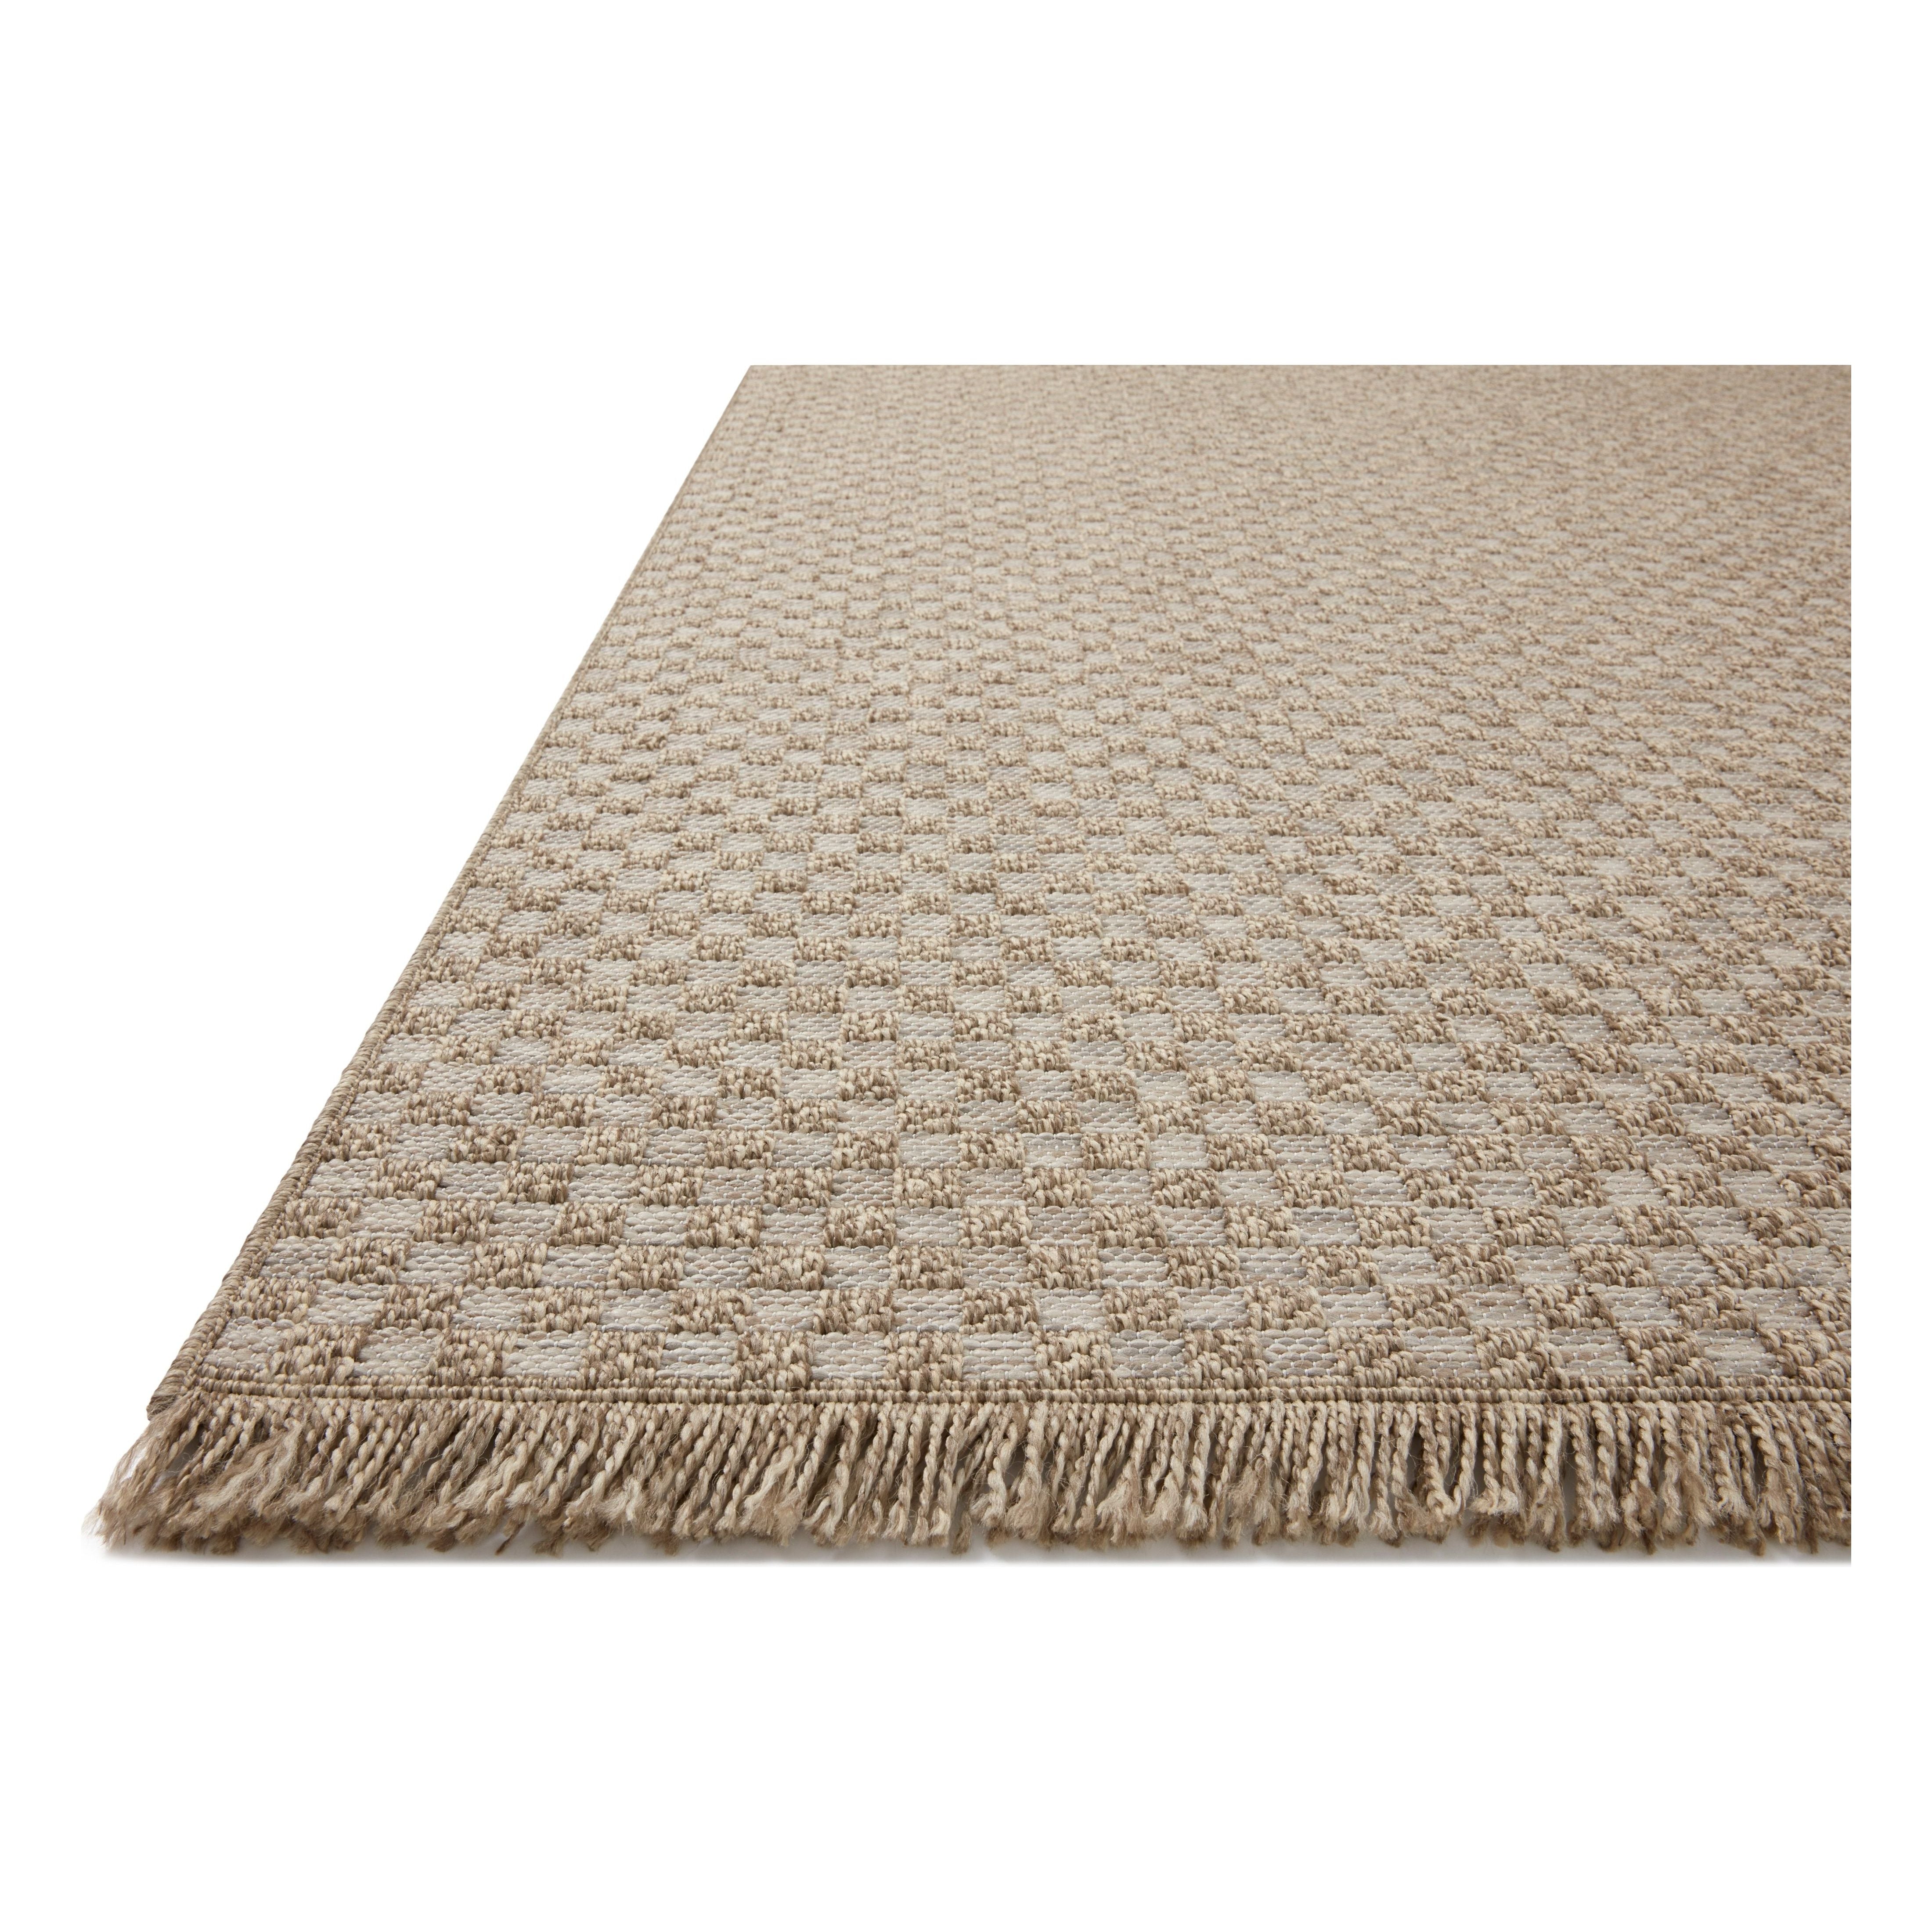 Made for sunny days ahead, the Dawn Collection is an indoor/outdoor rug that looks like a woven sisal rug but is power-loomed of 100% polypropylene, which makes it water- and mildew-resistant (so it's ready for rainy days ahead, too). Amethyst Home provides interior design, new home construction design consulting, vintage area rugs, and lighting in the Dallas metro area.